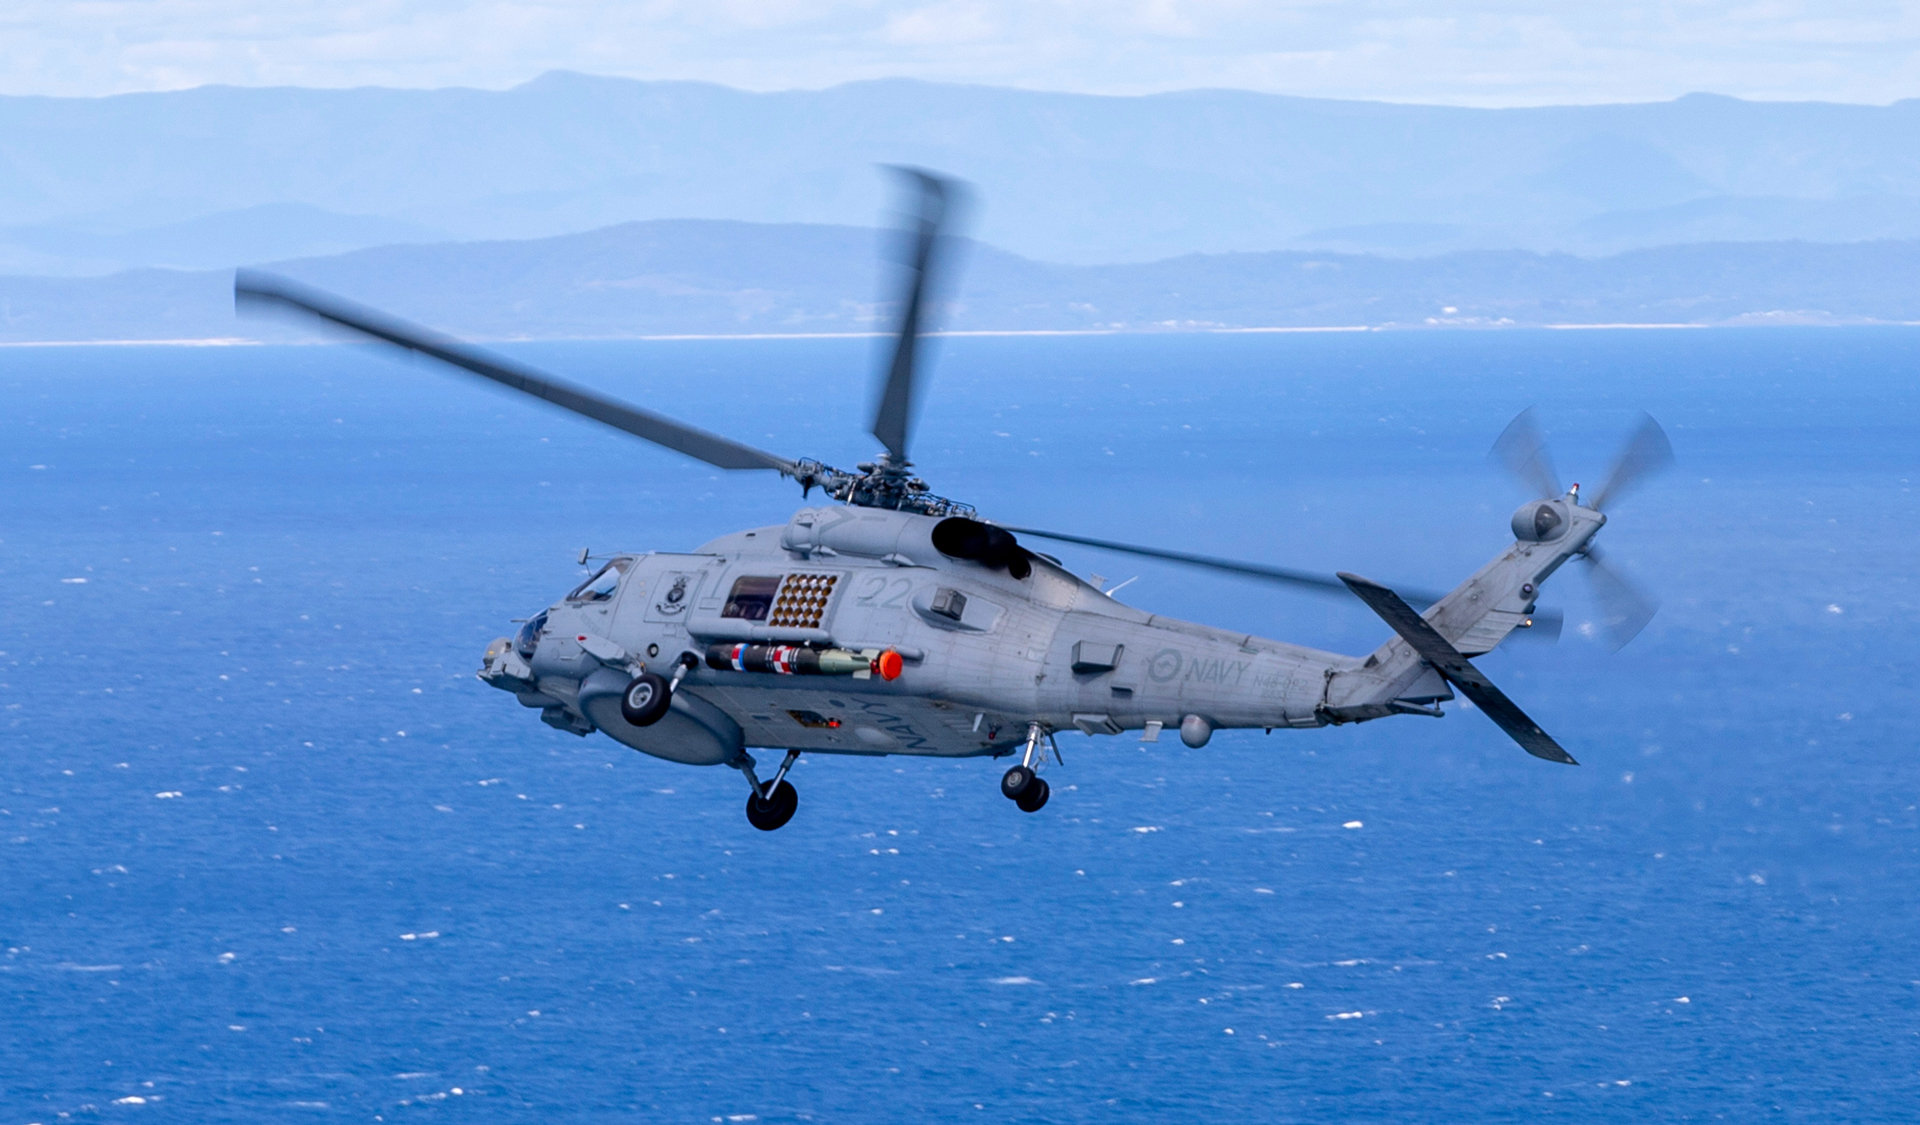 The Royal Australian Navy has placed a second order for U.S. Navy MH-60R helicopters. Photo courtesy RAN.